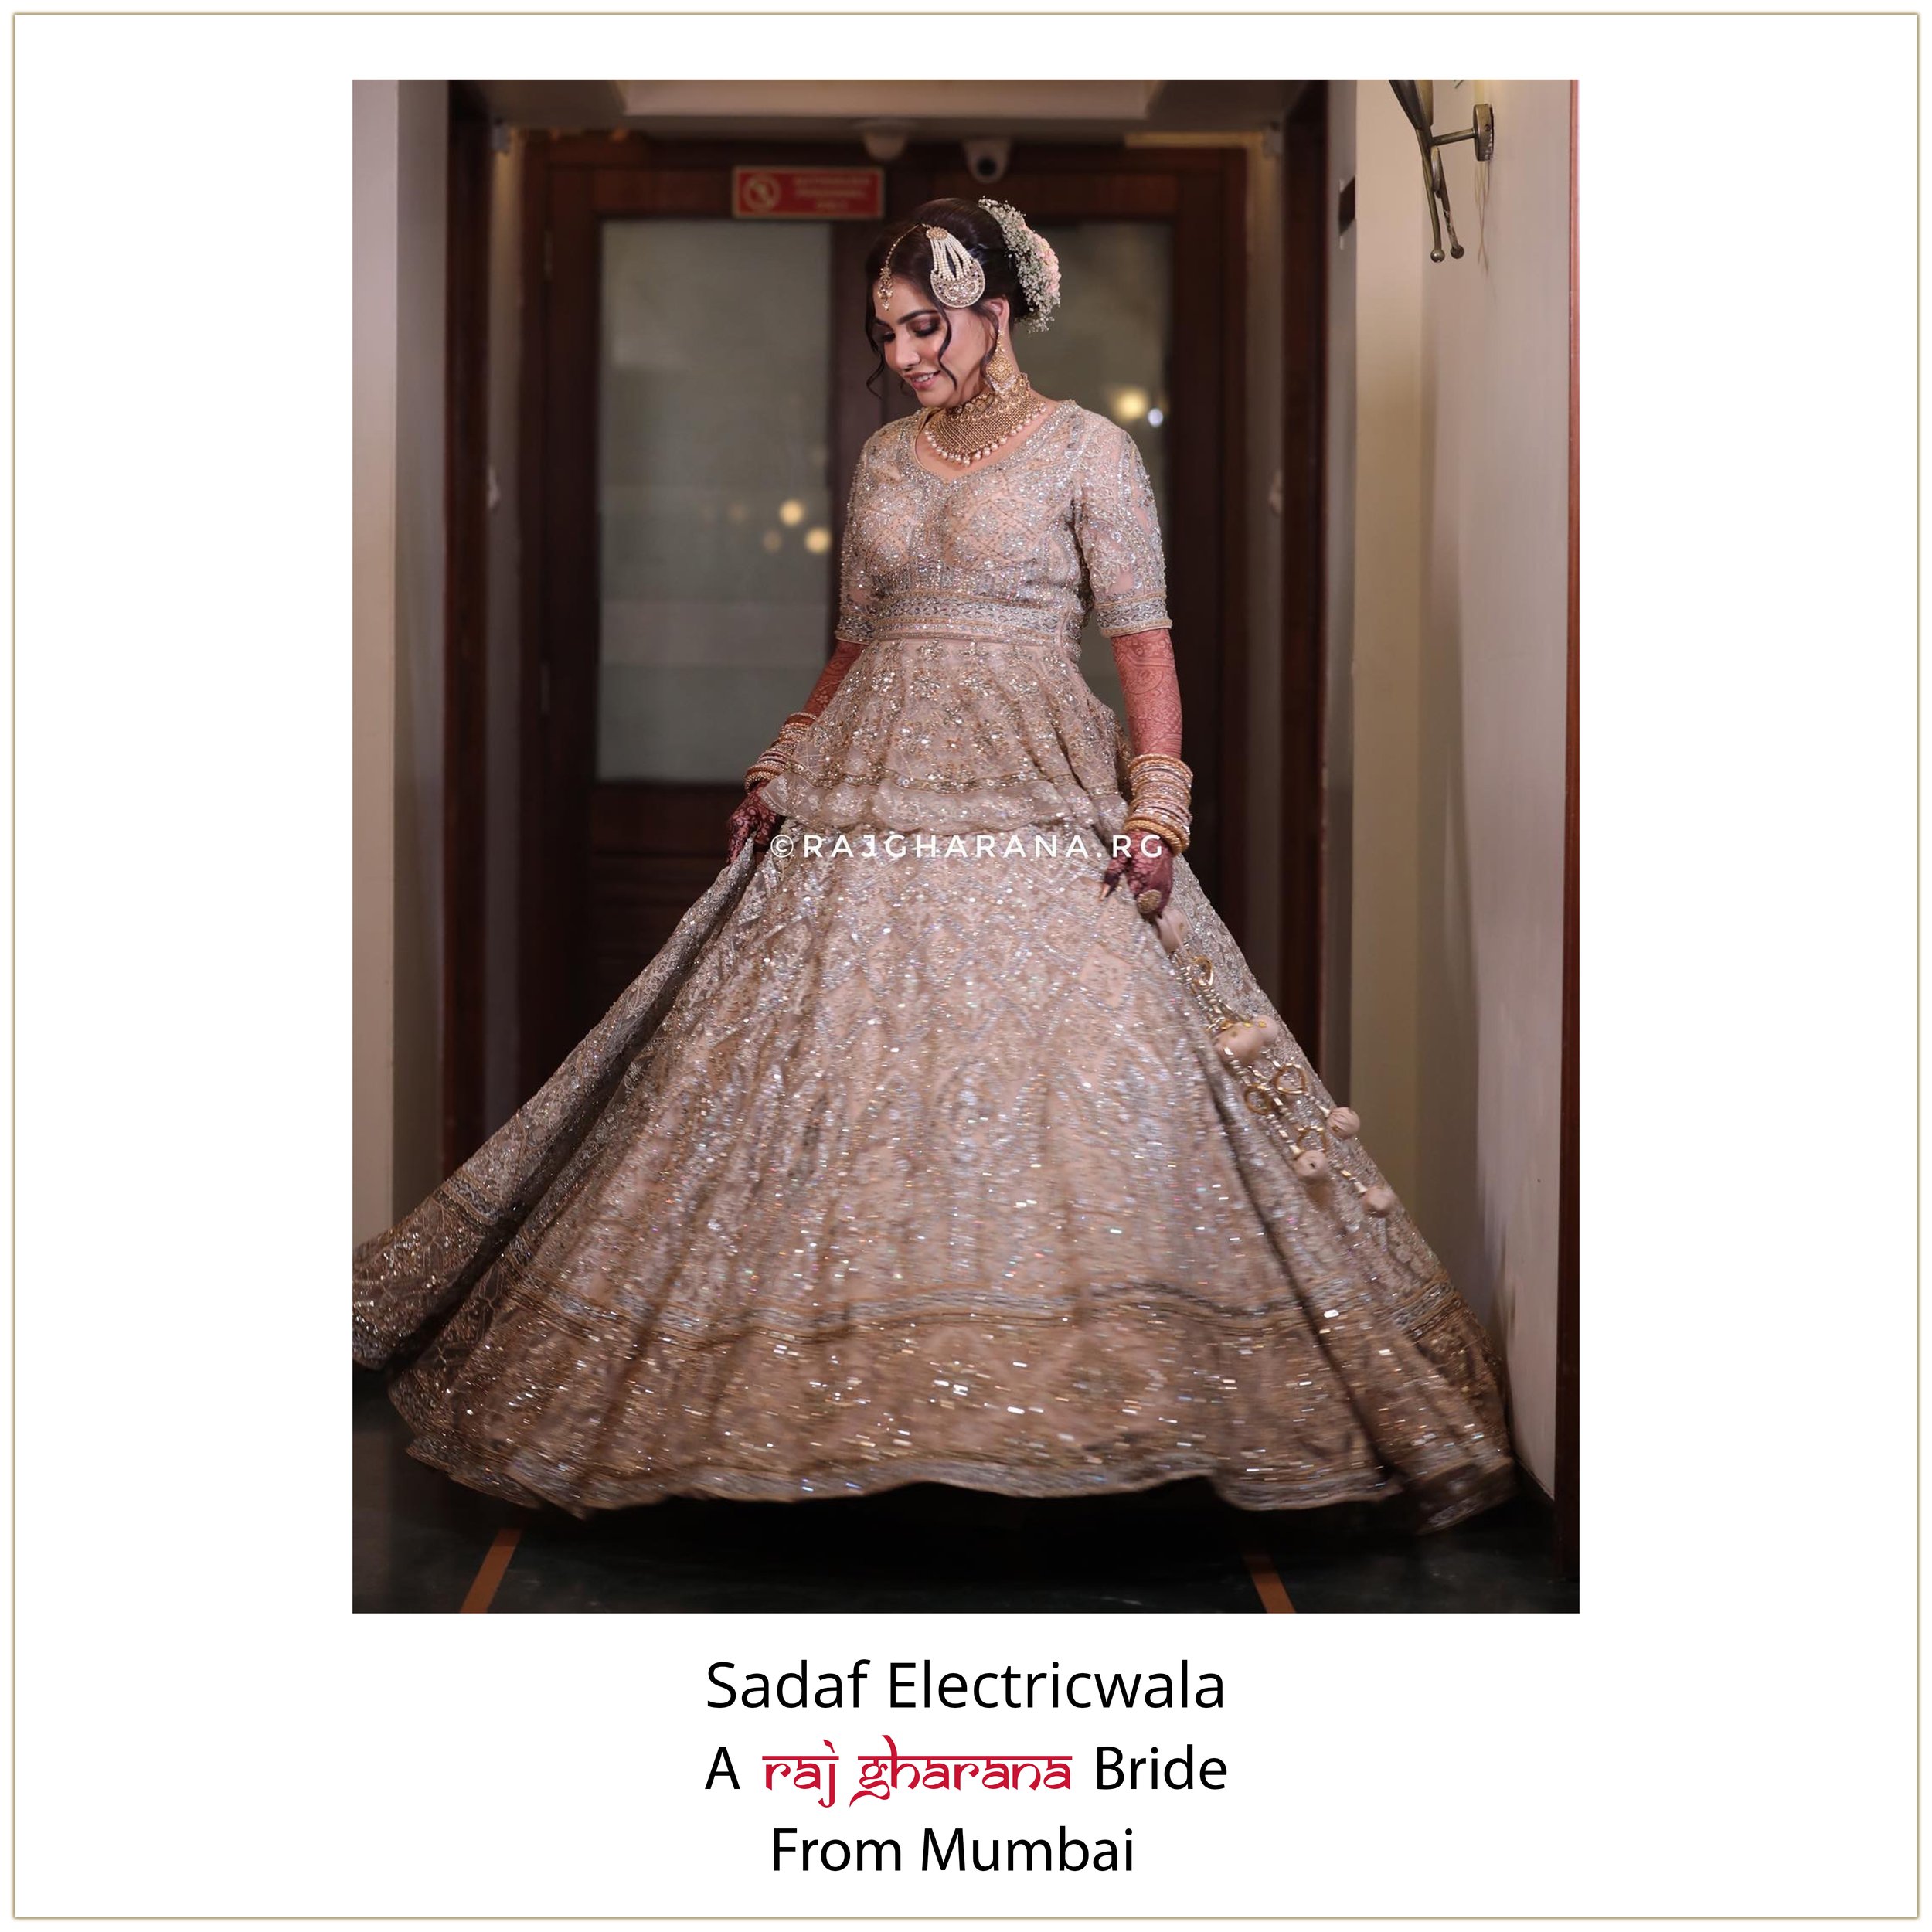 An Exquisite Wedding In Mumbai Where The Bride Herself Was The Designer Of  The Wedding Outfits | Groom wedding pictures, Wedding outfit, Bride